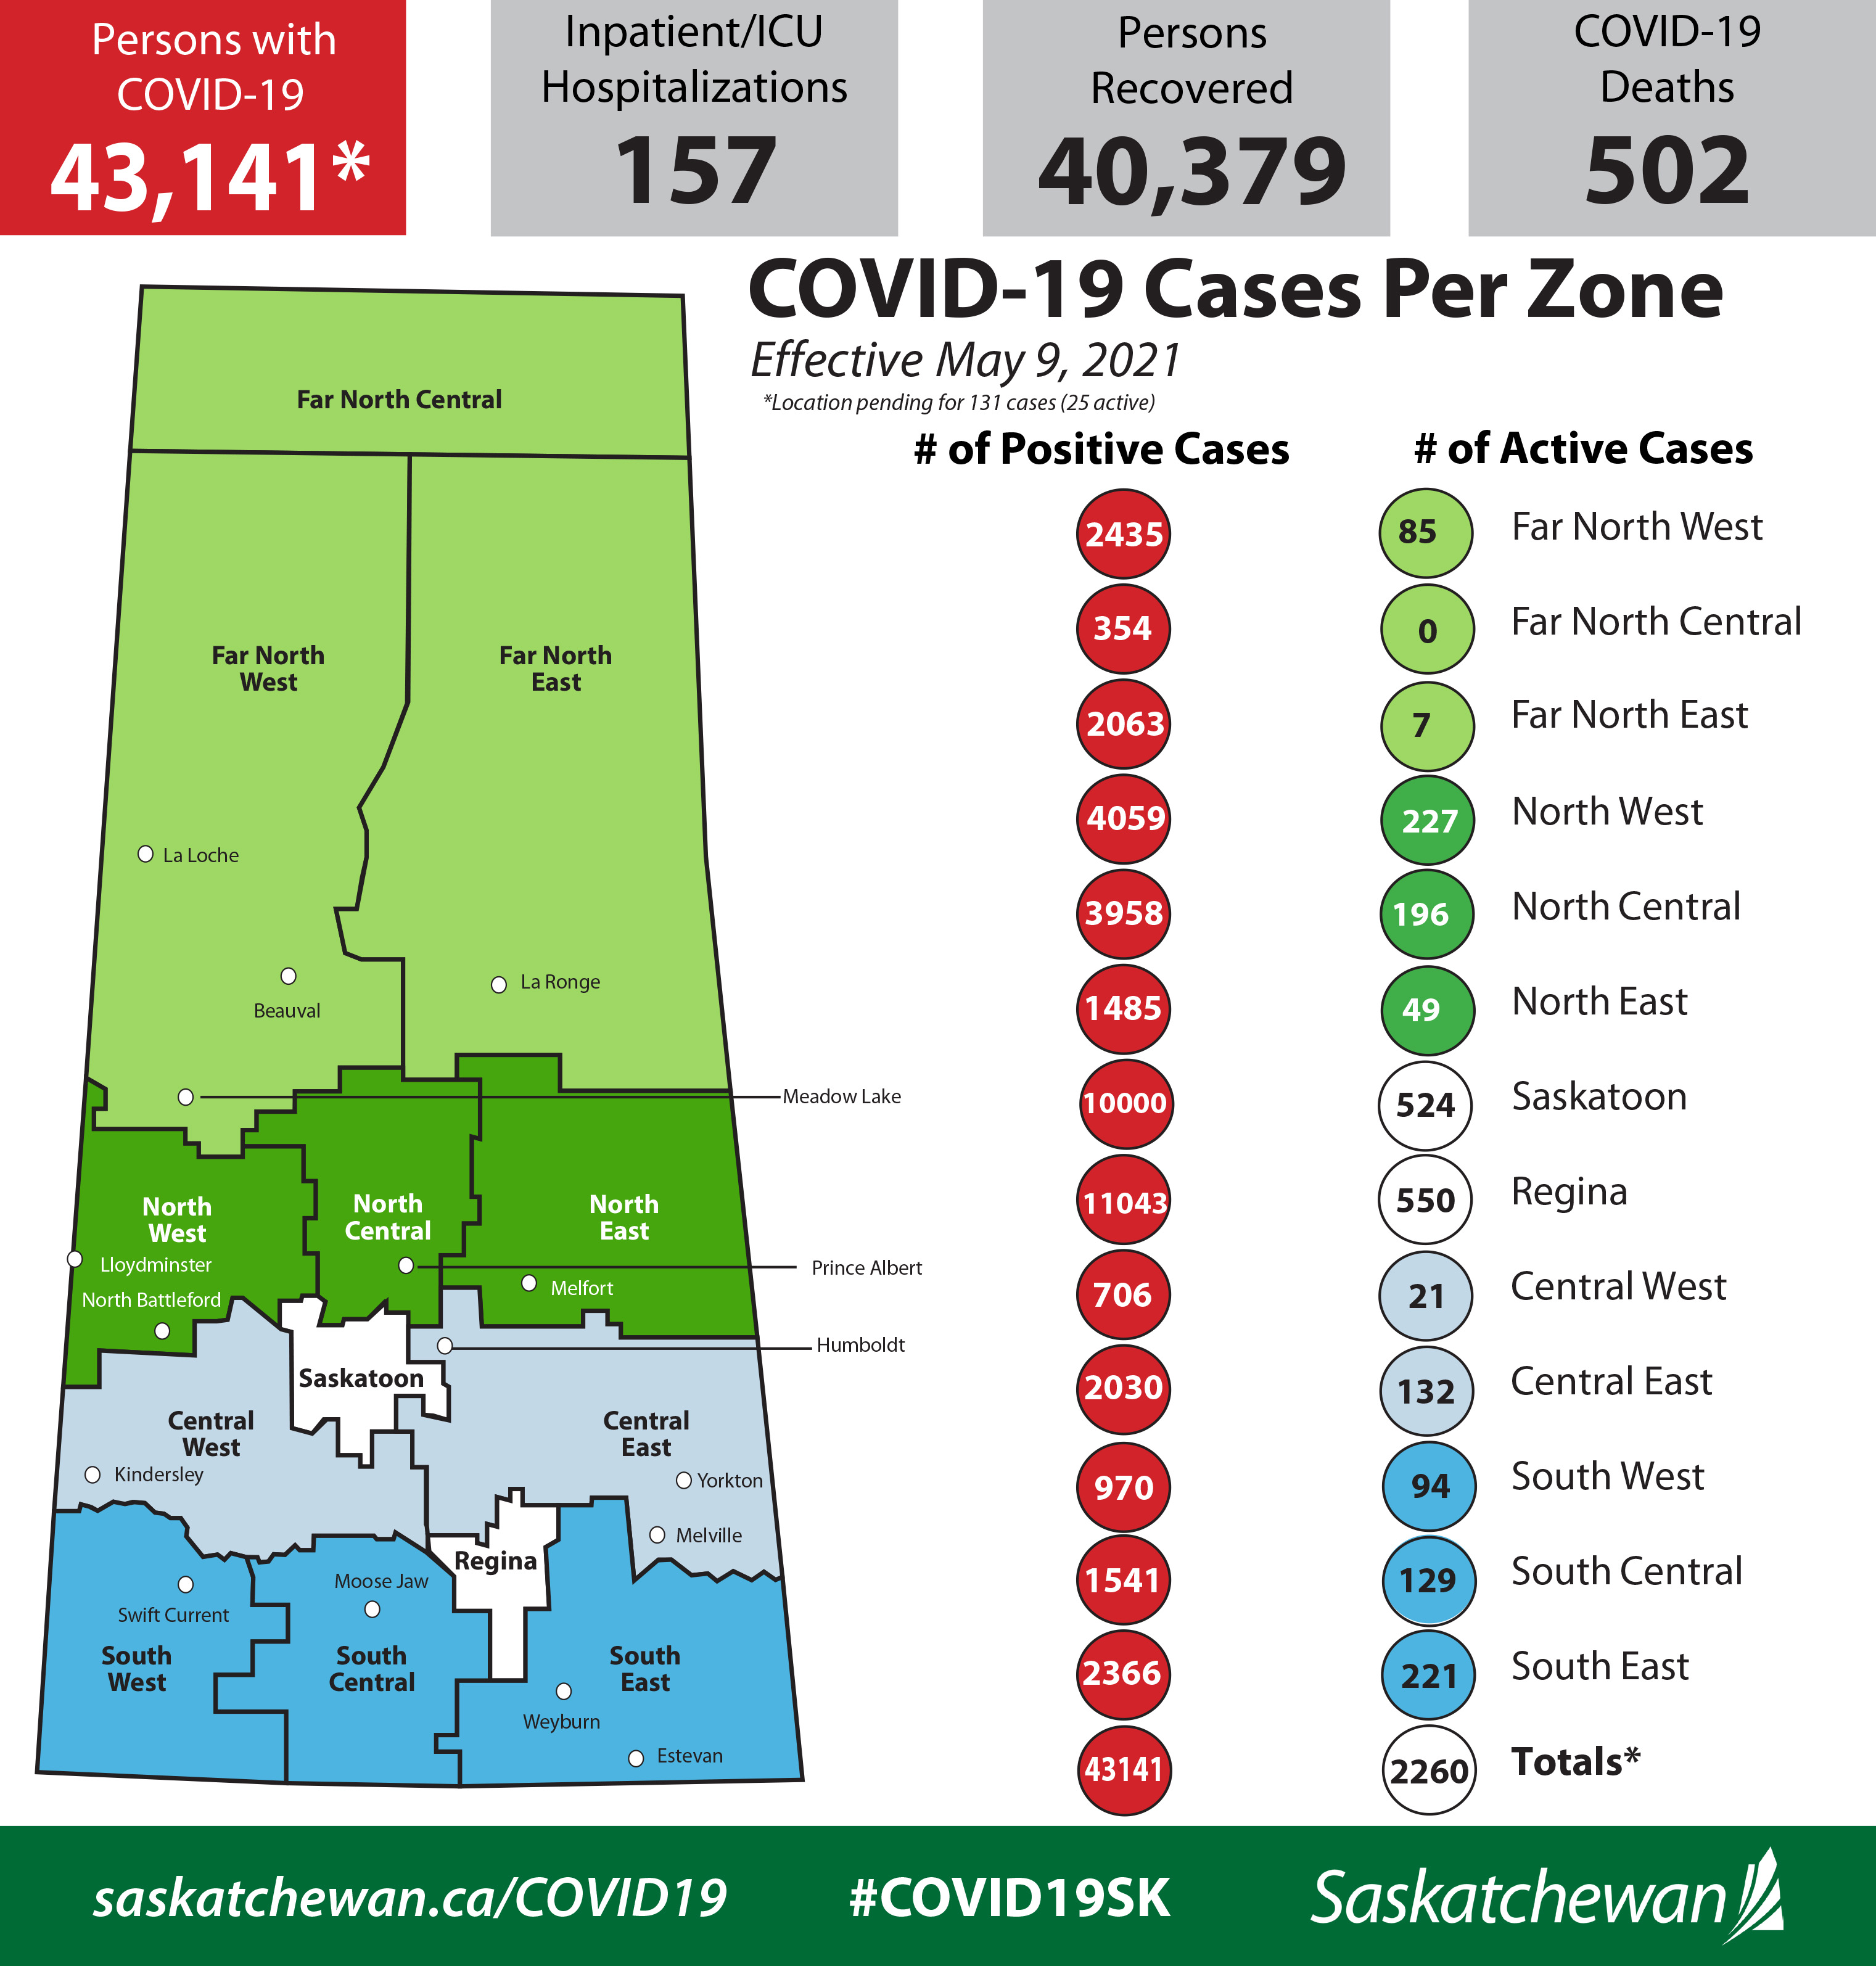 COVID-19 Update For May 9: 518,133 Vaccines Administered, 177 New Cases, 210 Recoveries, No New Deaths